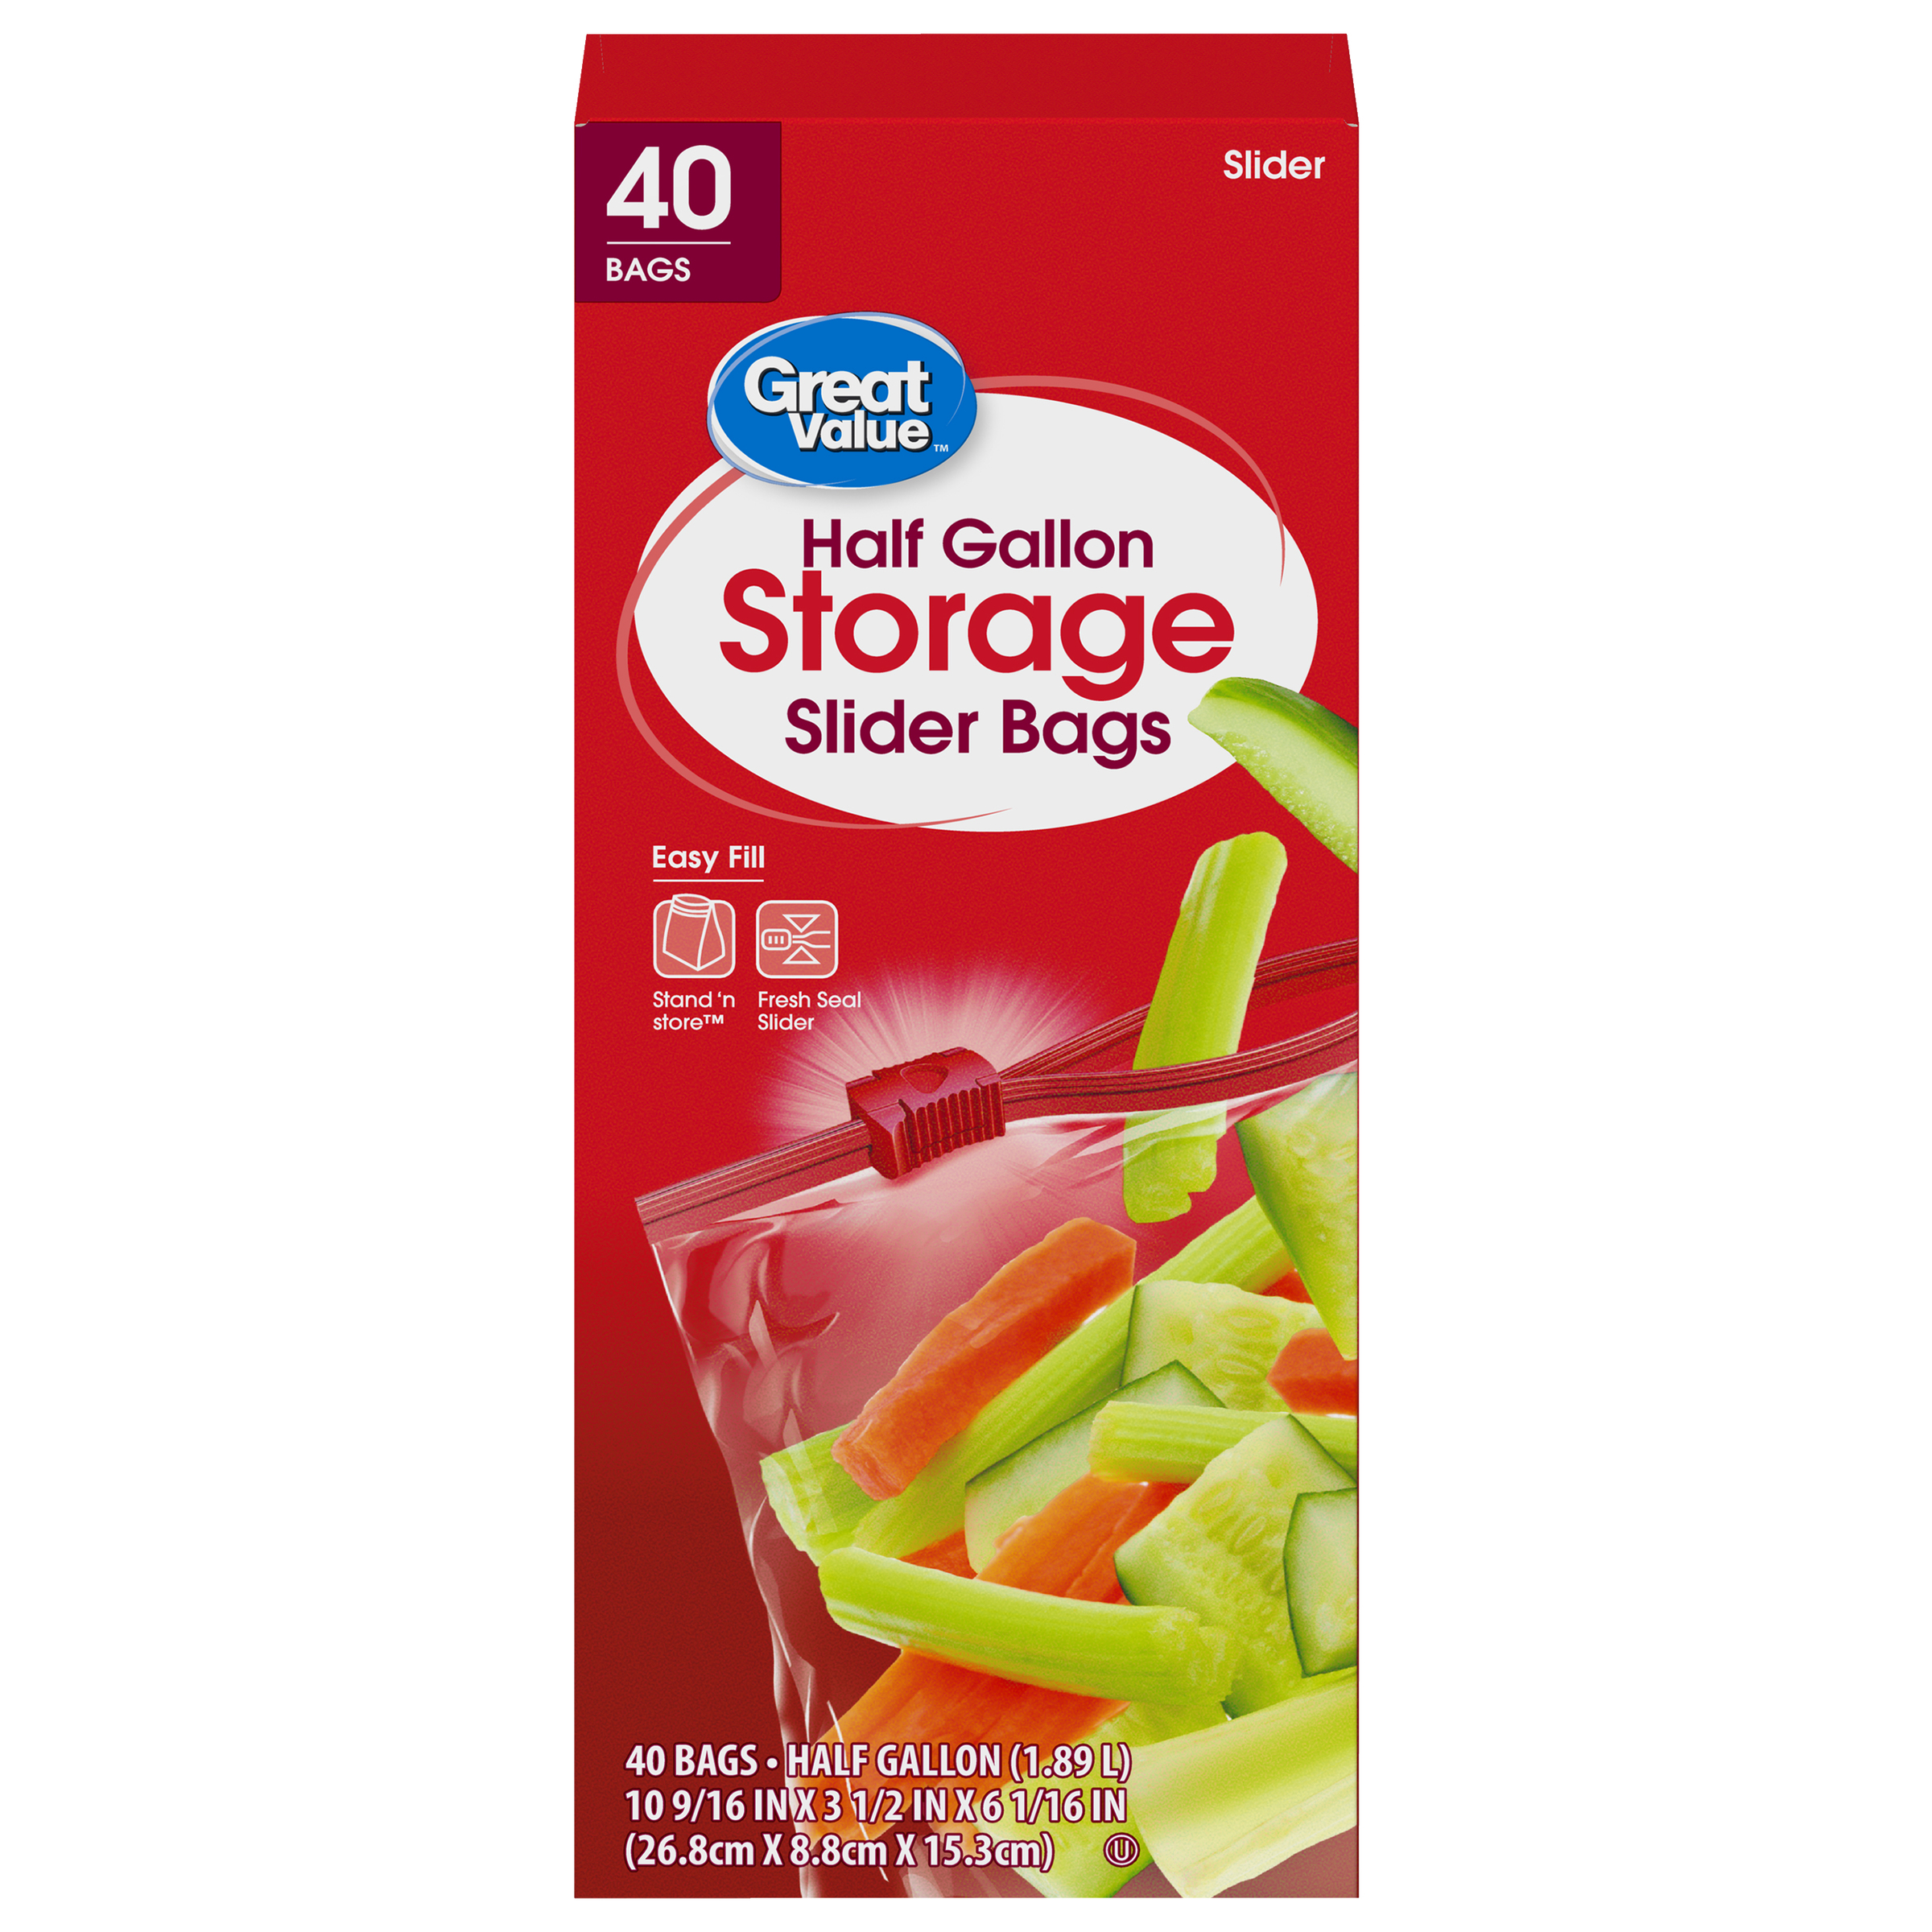 Great Value Half Gallon Slider Bags, 40 Count - image 1 of 6